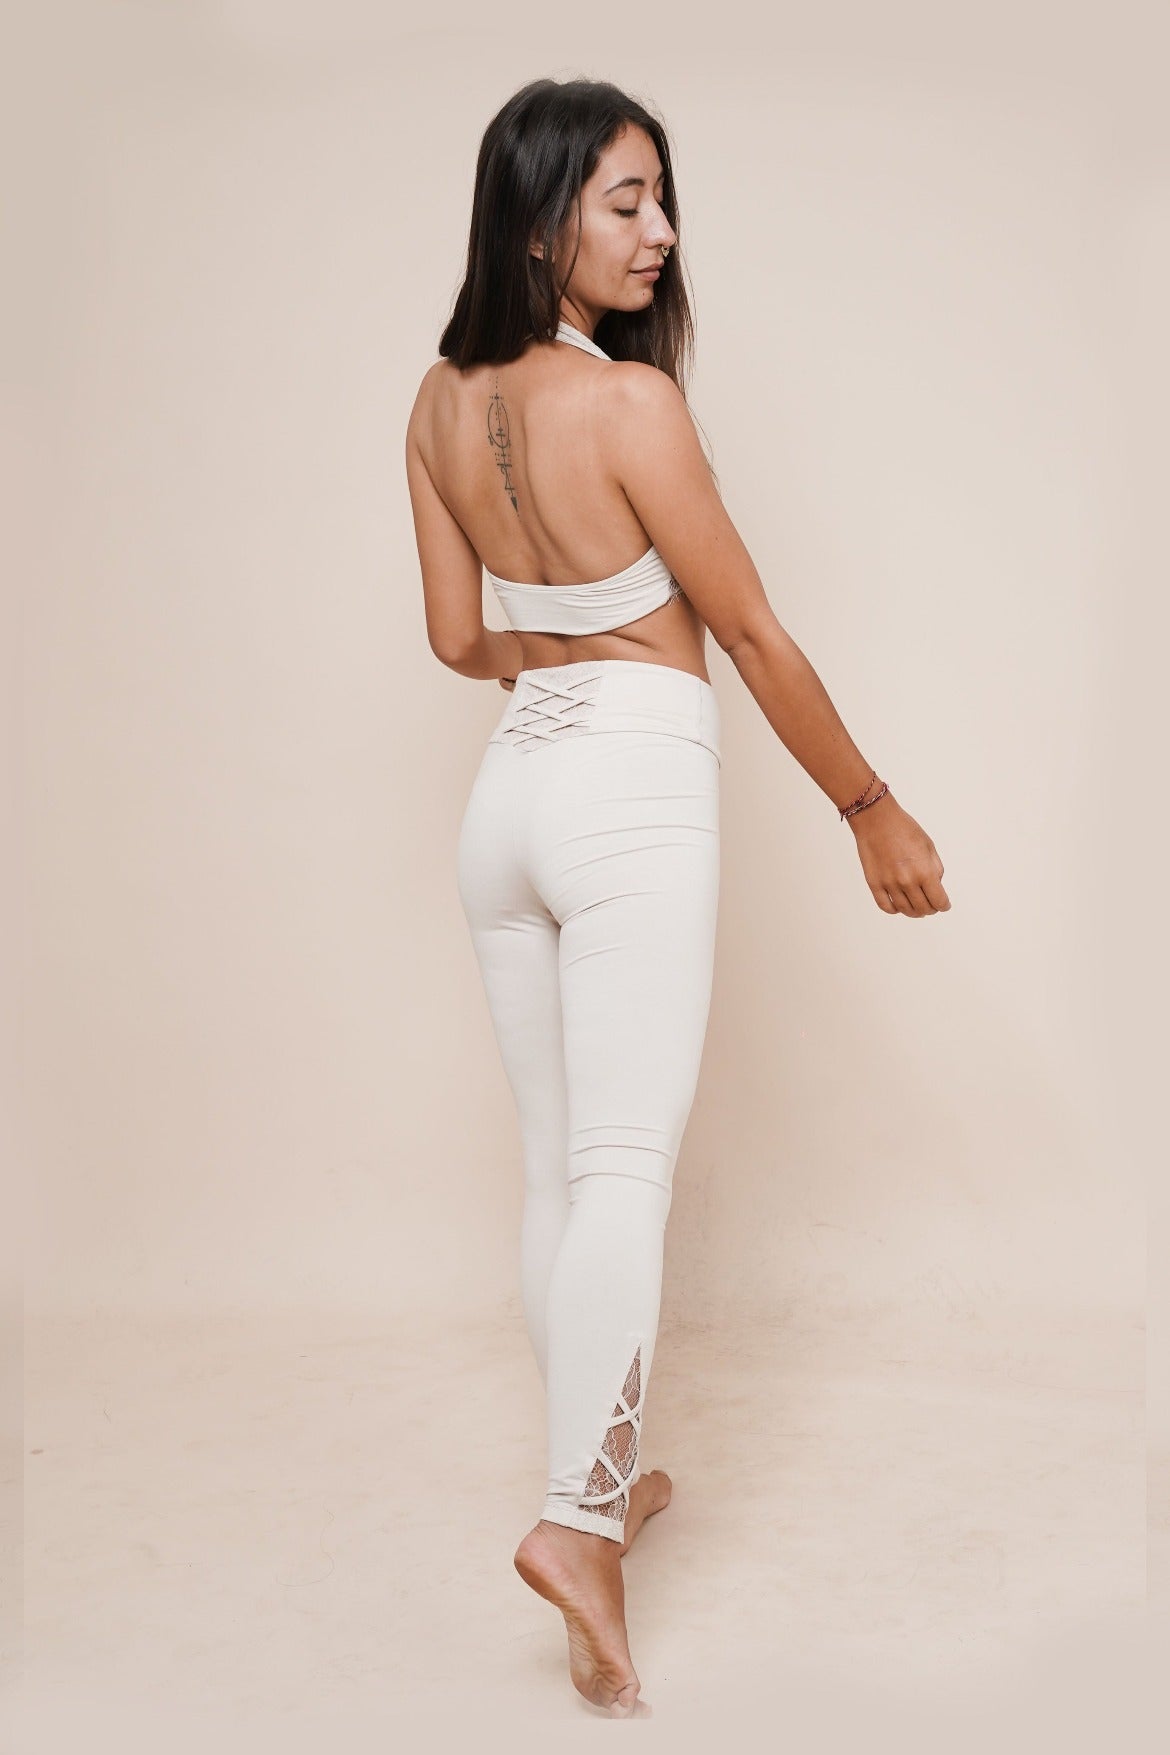 Comfortable leggings for all kinds of workouts and yoga & Elegance - Halter Lace Top by Bohemian GoddessI Color: Winter white I www.bohemiangoddess.com